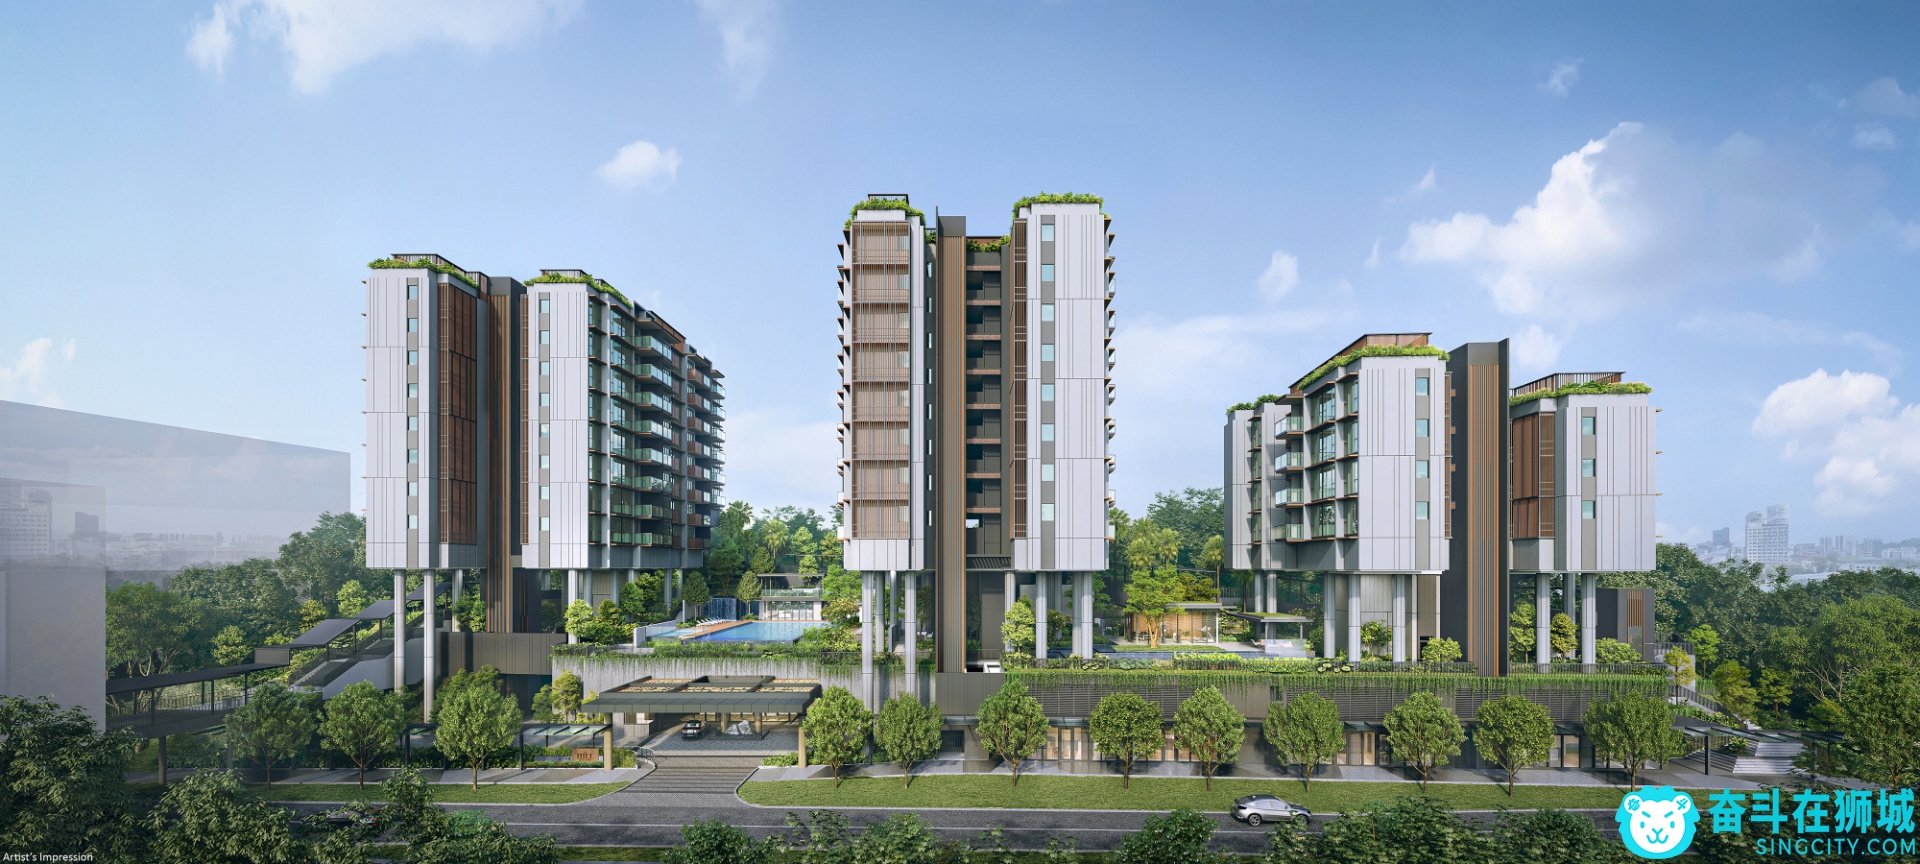 the-hill-at-one-north-photo-singapore-new-launch-mixed-development-5289f2a70c333.jpg